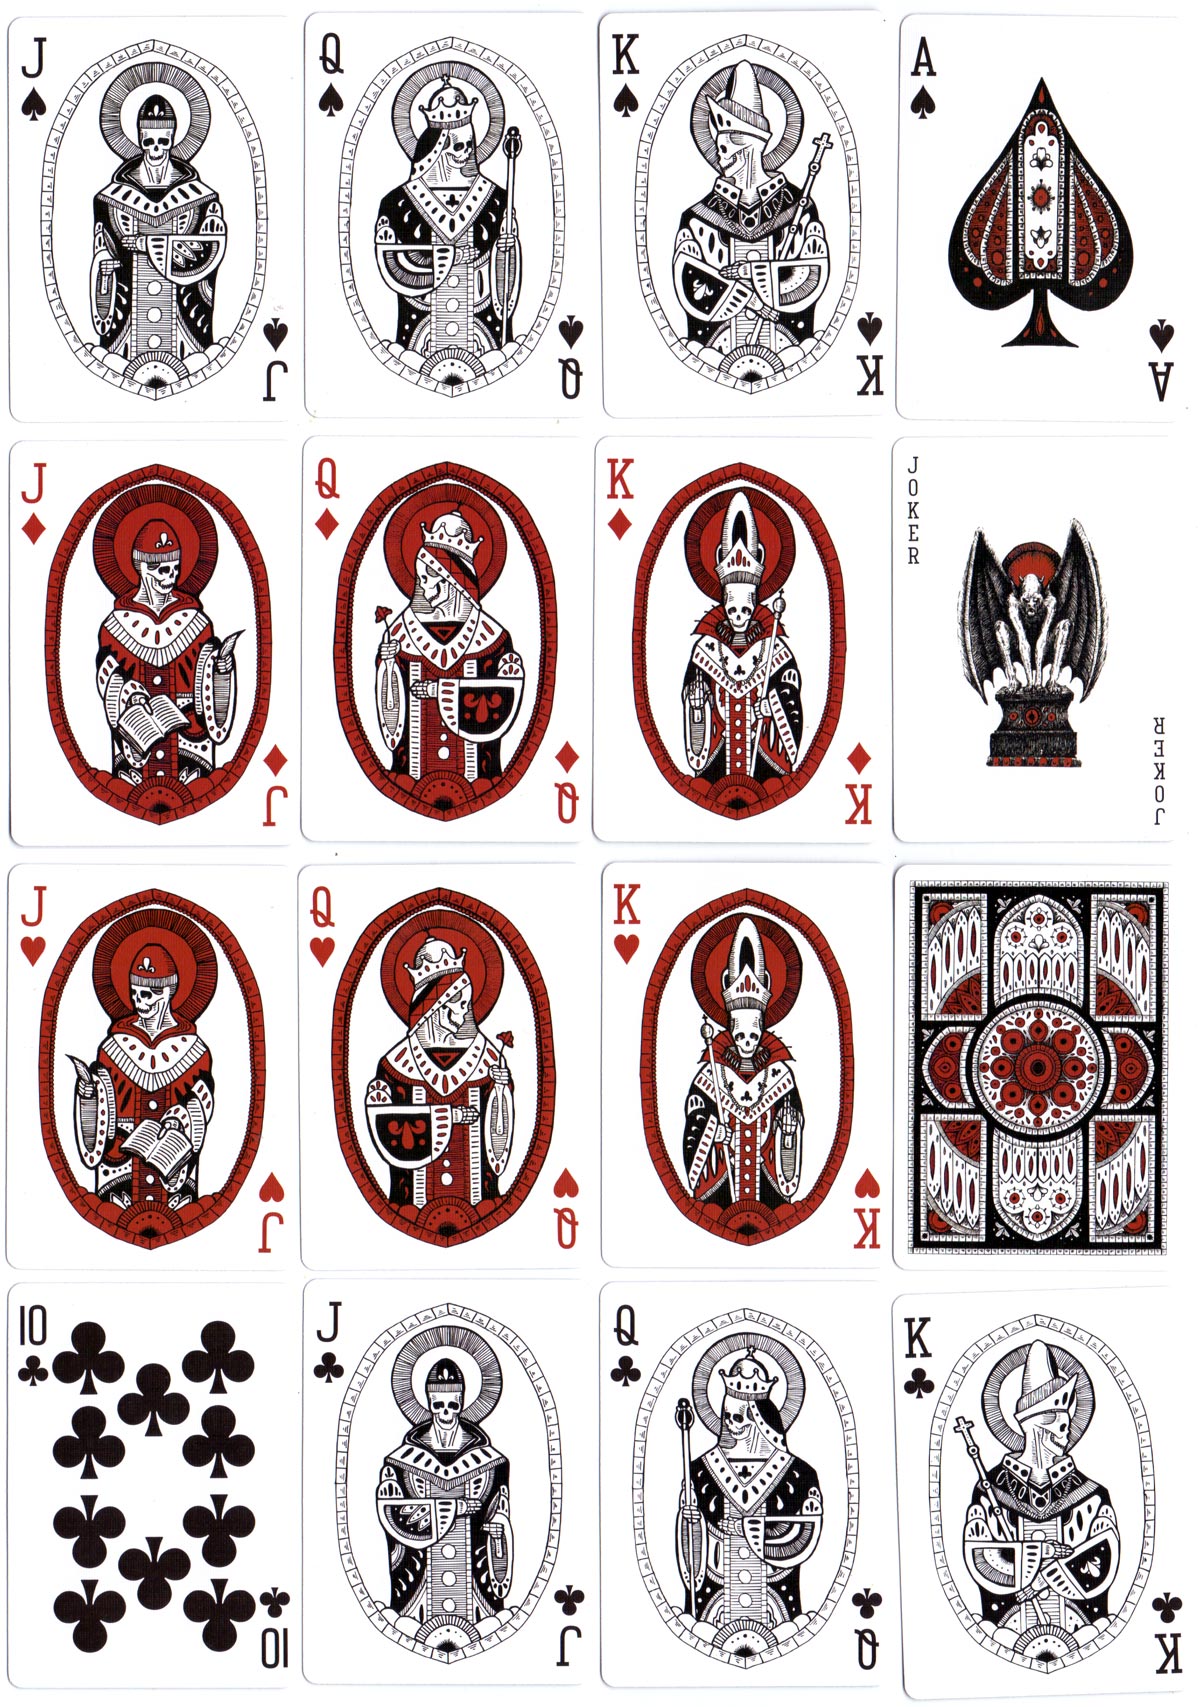 “Revelation” playing cards illustrated by Michael Messer